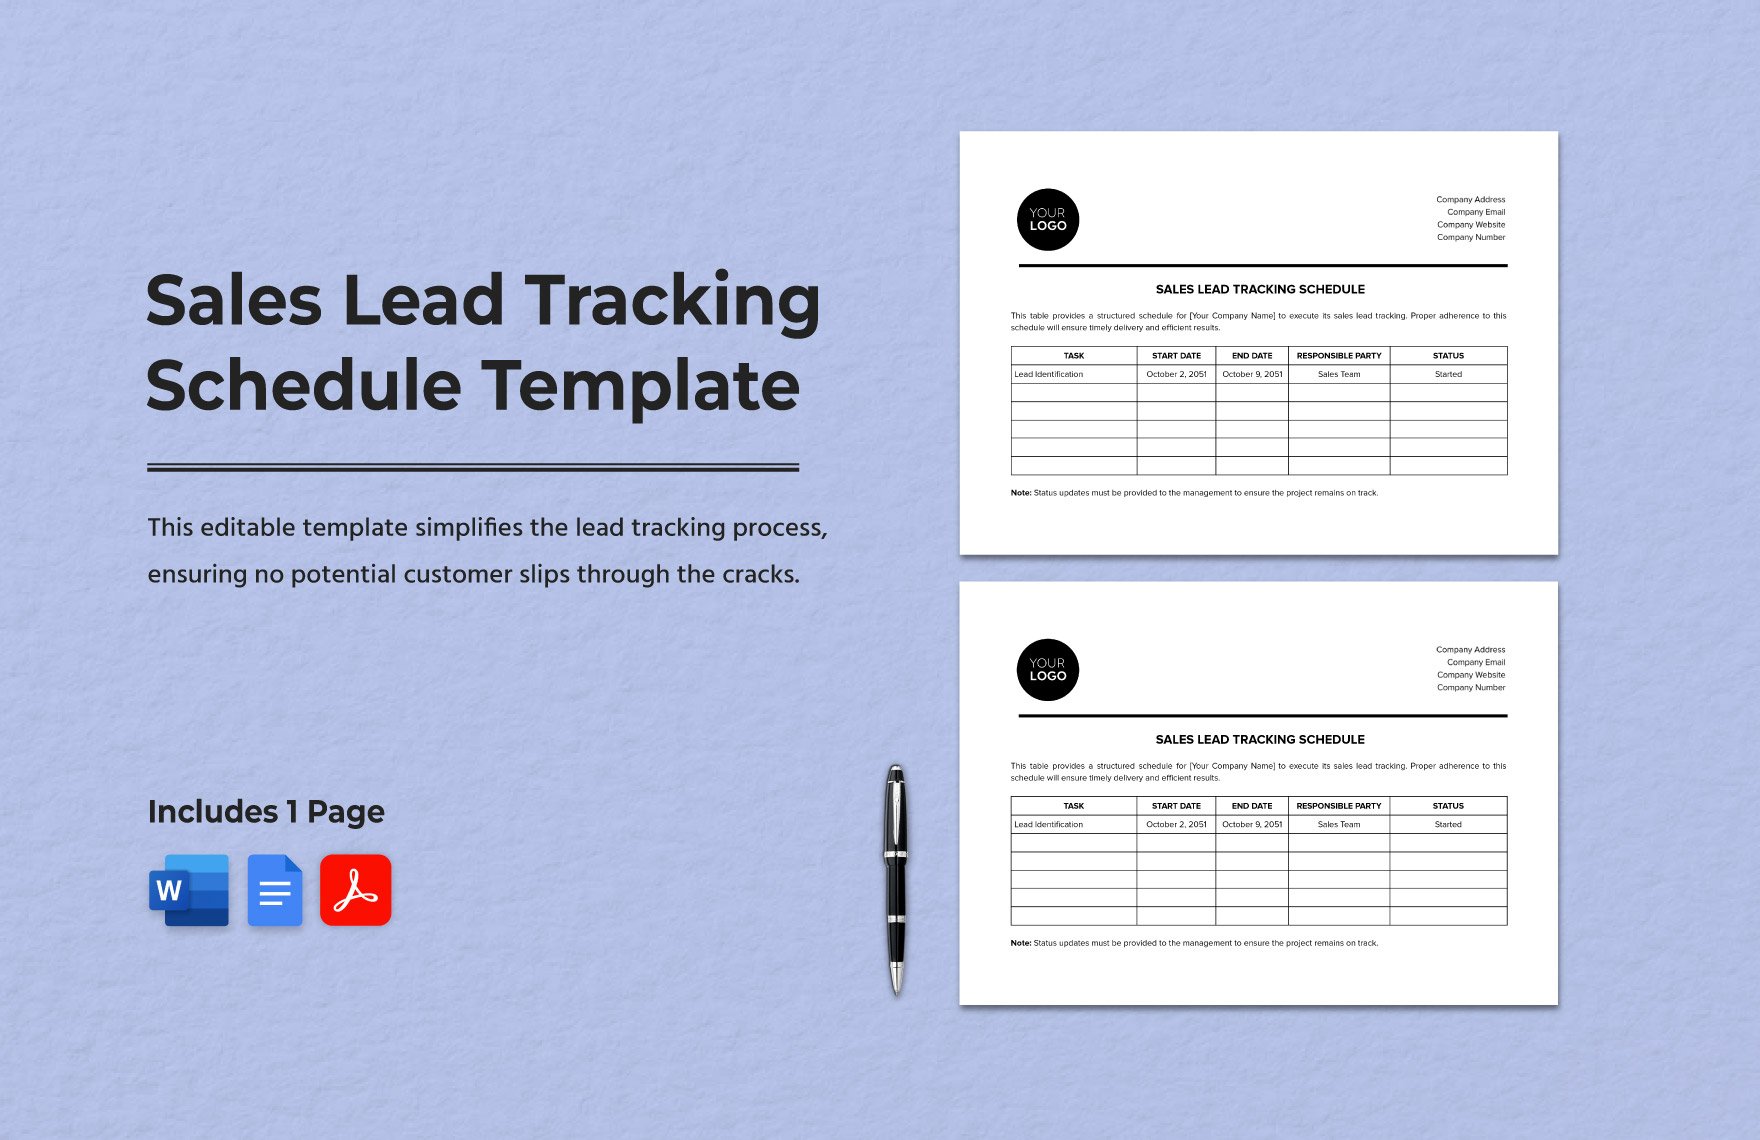 Sales Lead Tracking Schedule Template